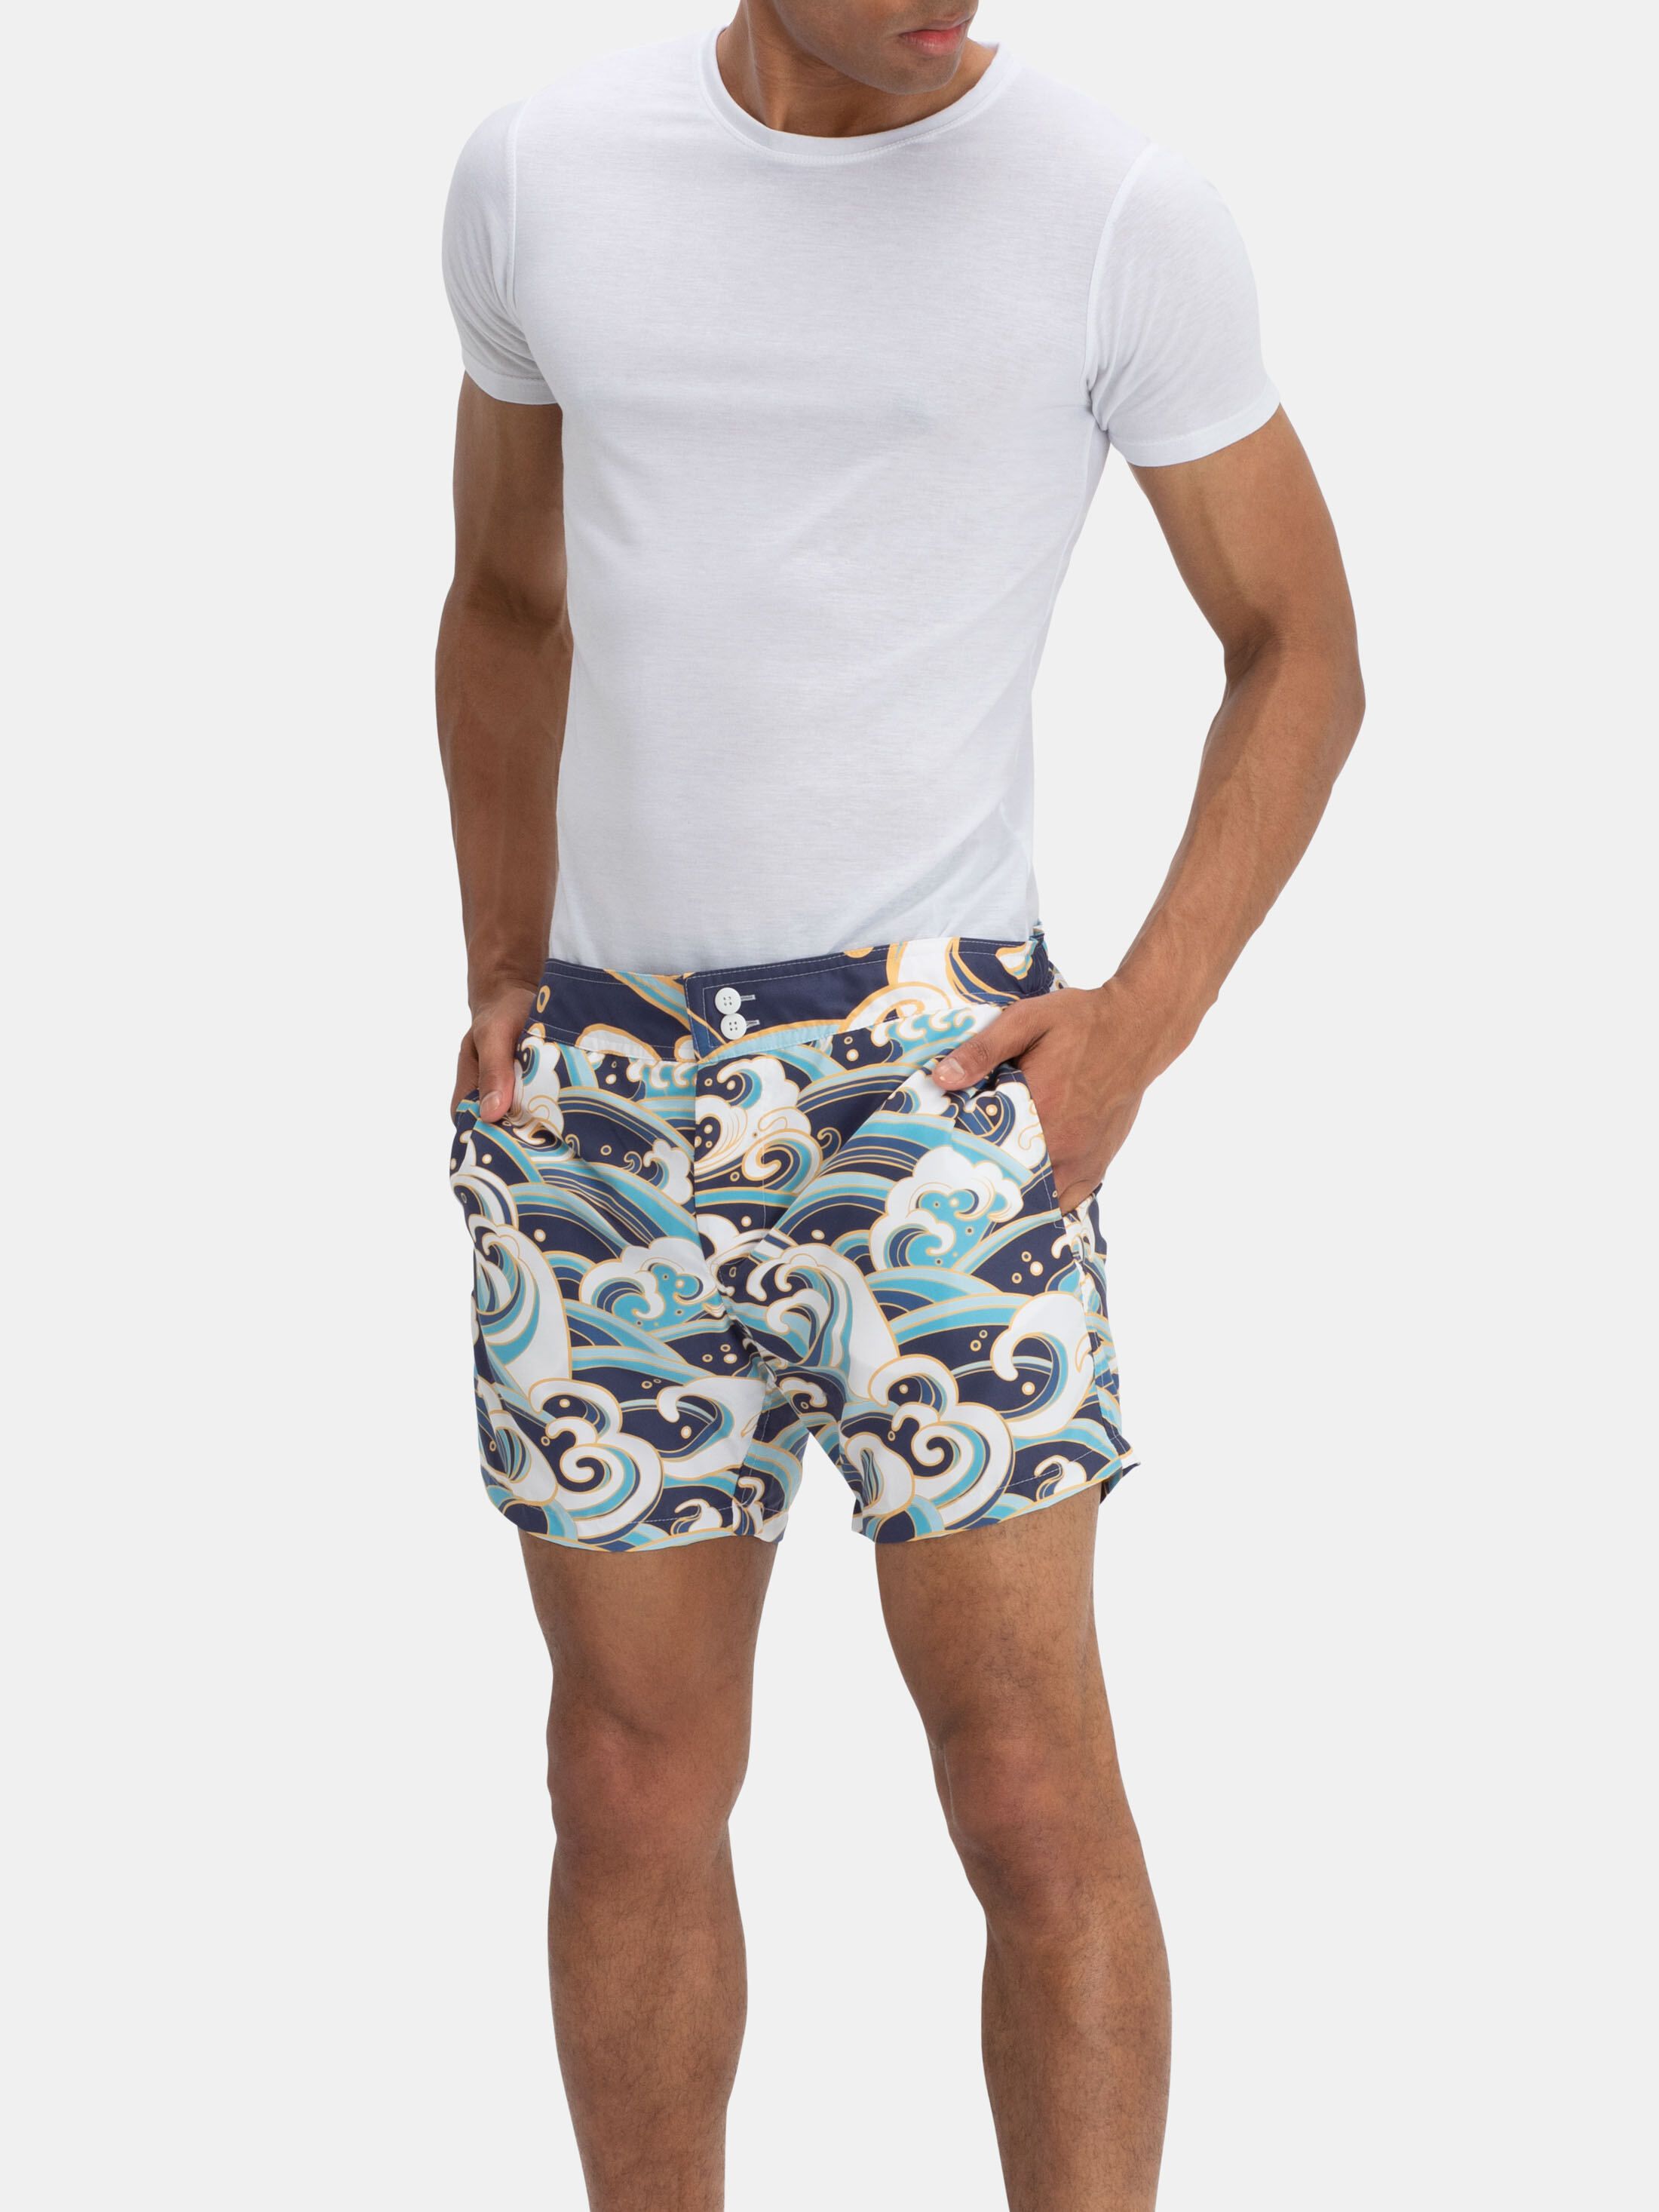 design your own slim fit shorts